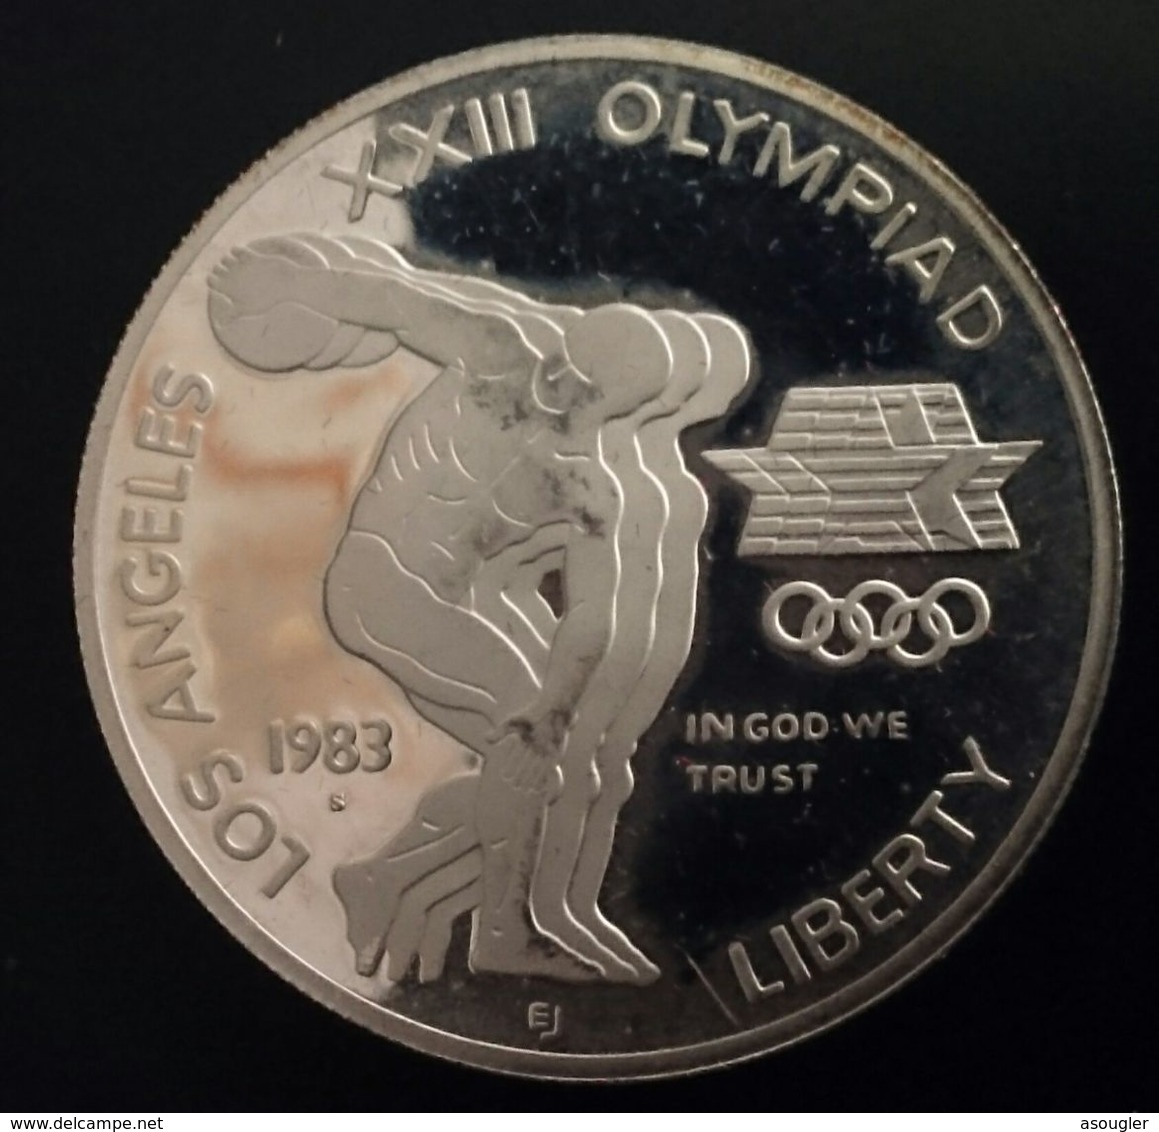 USA 1 $ DOLLAR 1983 S SILVER PROOF "1984 LOS ANGELES OLYMPICS - DISCUS" Free Shipping Via Registered Air Mail - Conmemorativas